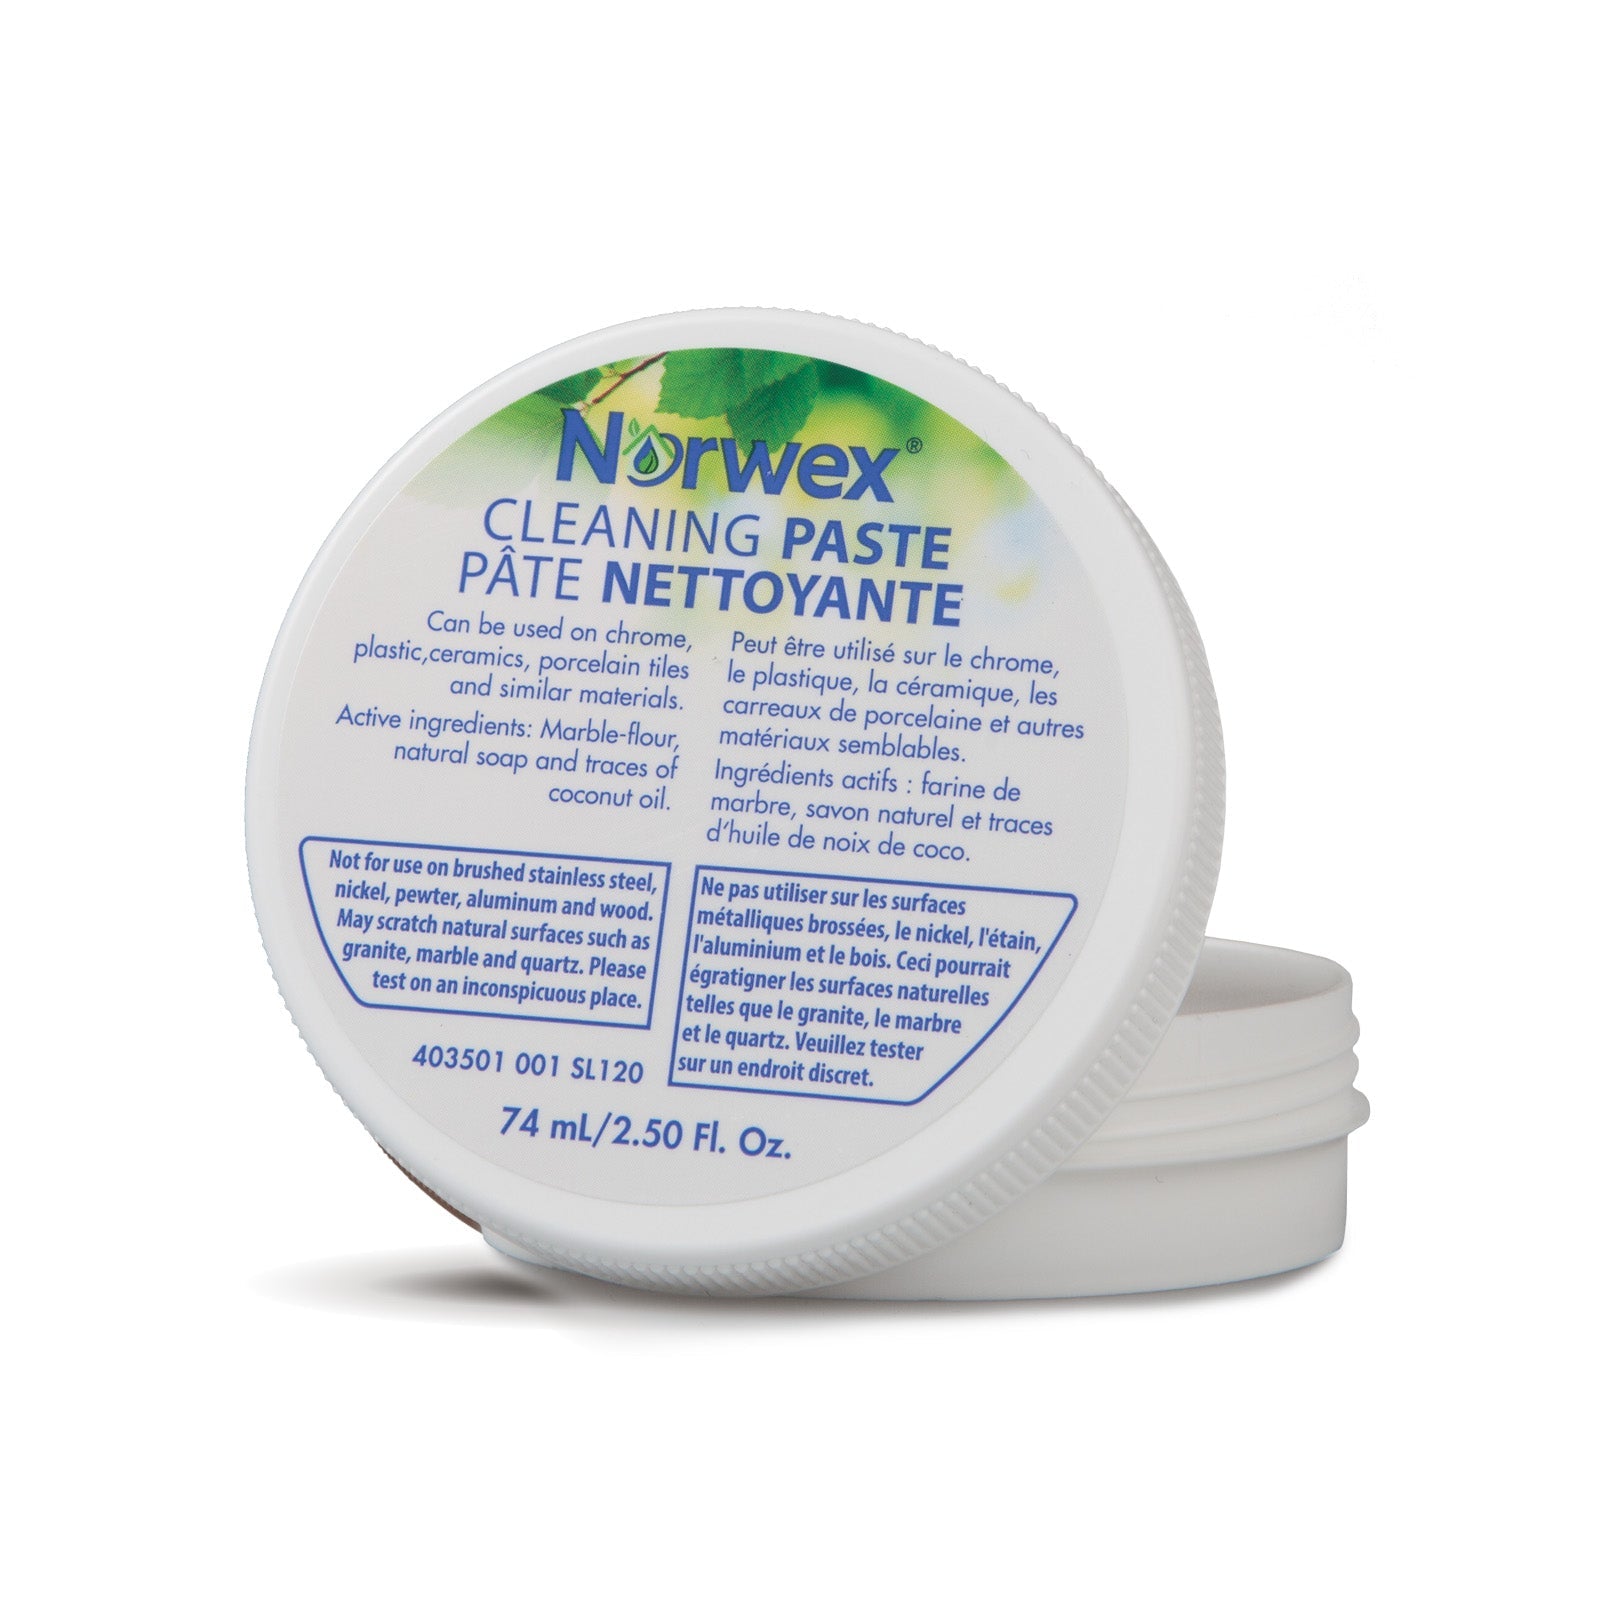 Cleaning Paste Norwex Cleans Dirt, Stain Removal & Polish 200ml 6.76fl oz